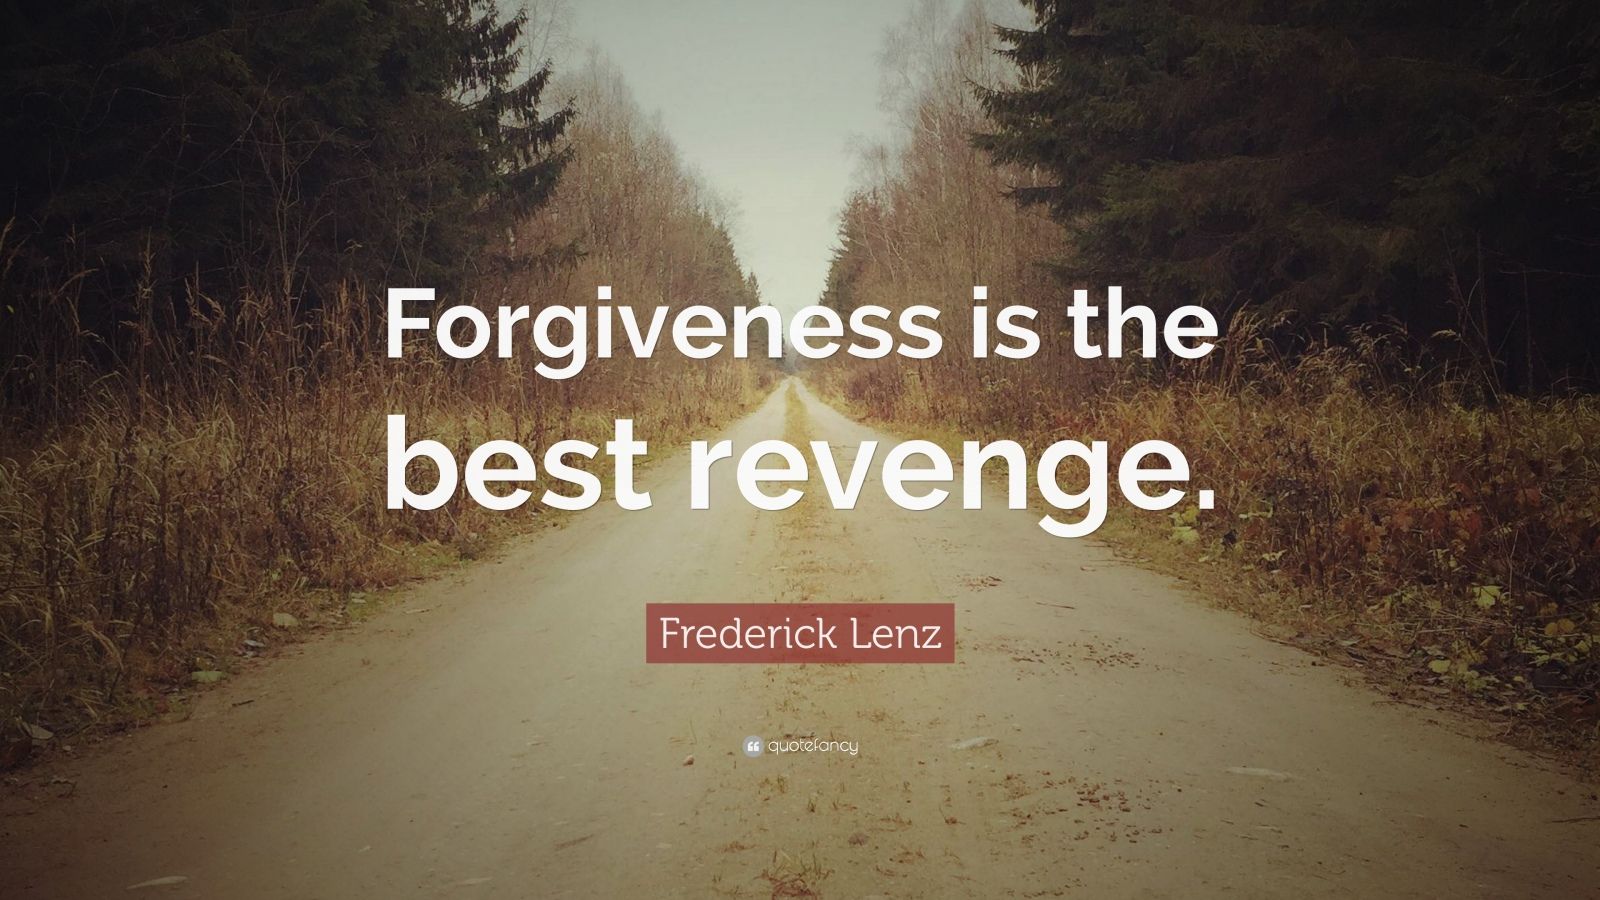 essay on forgiveness is the best revenge